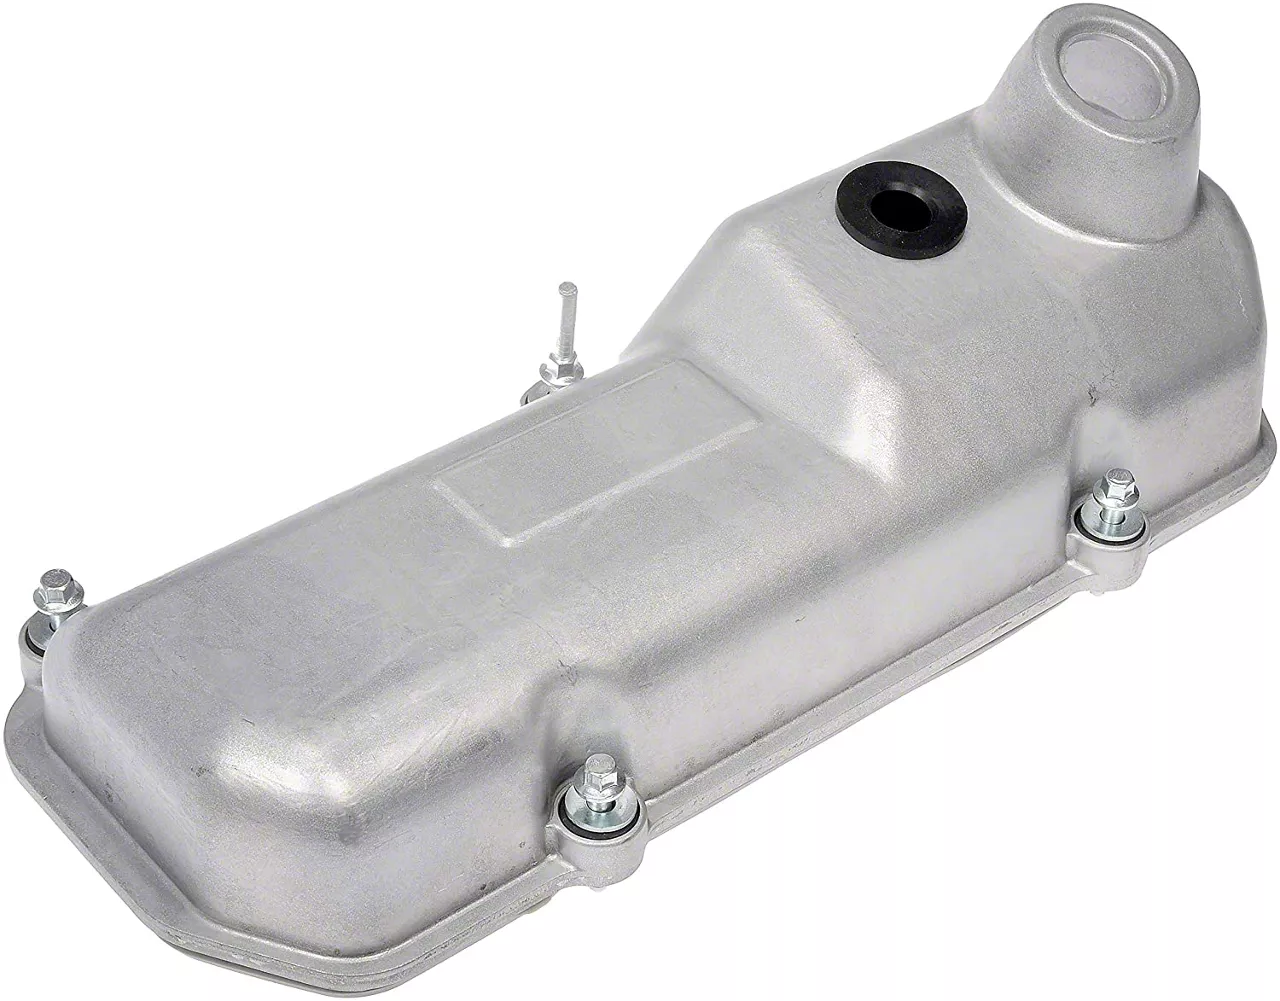 1999-2004 Mustang Valve Covers | AmericanMuscle